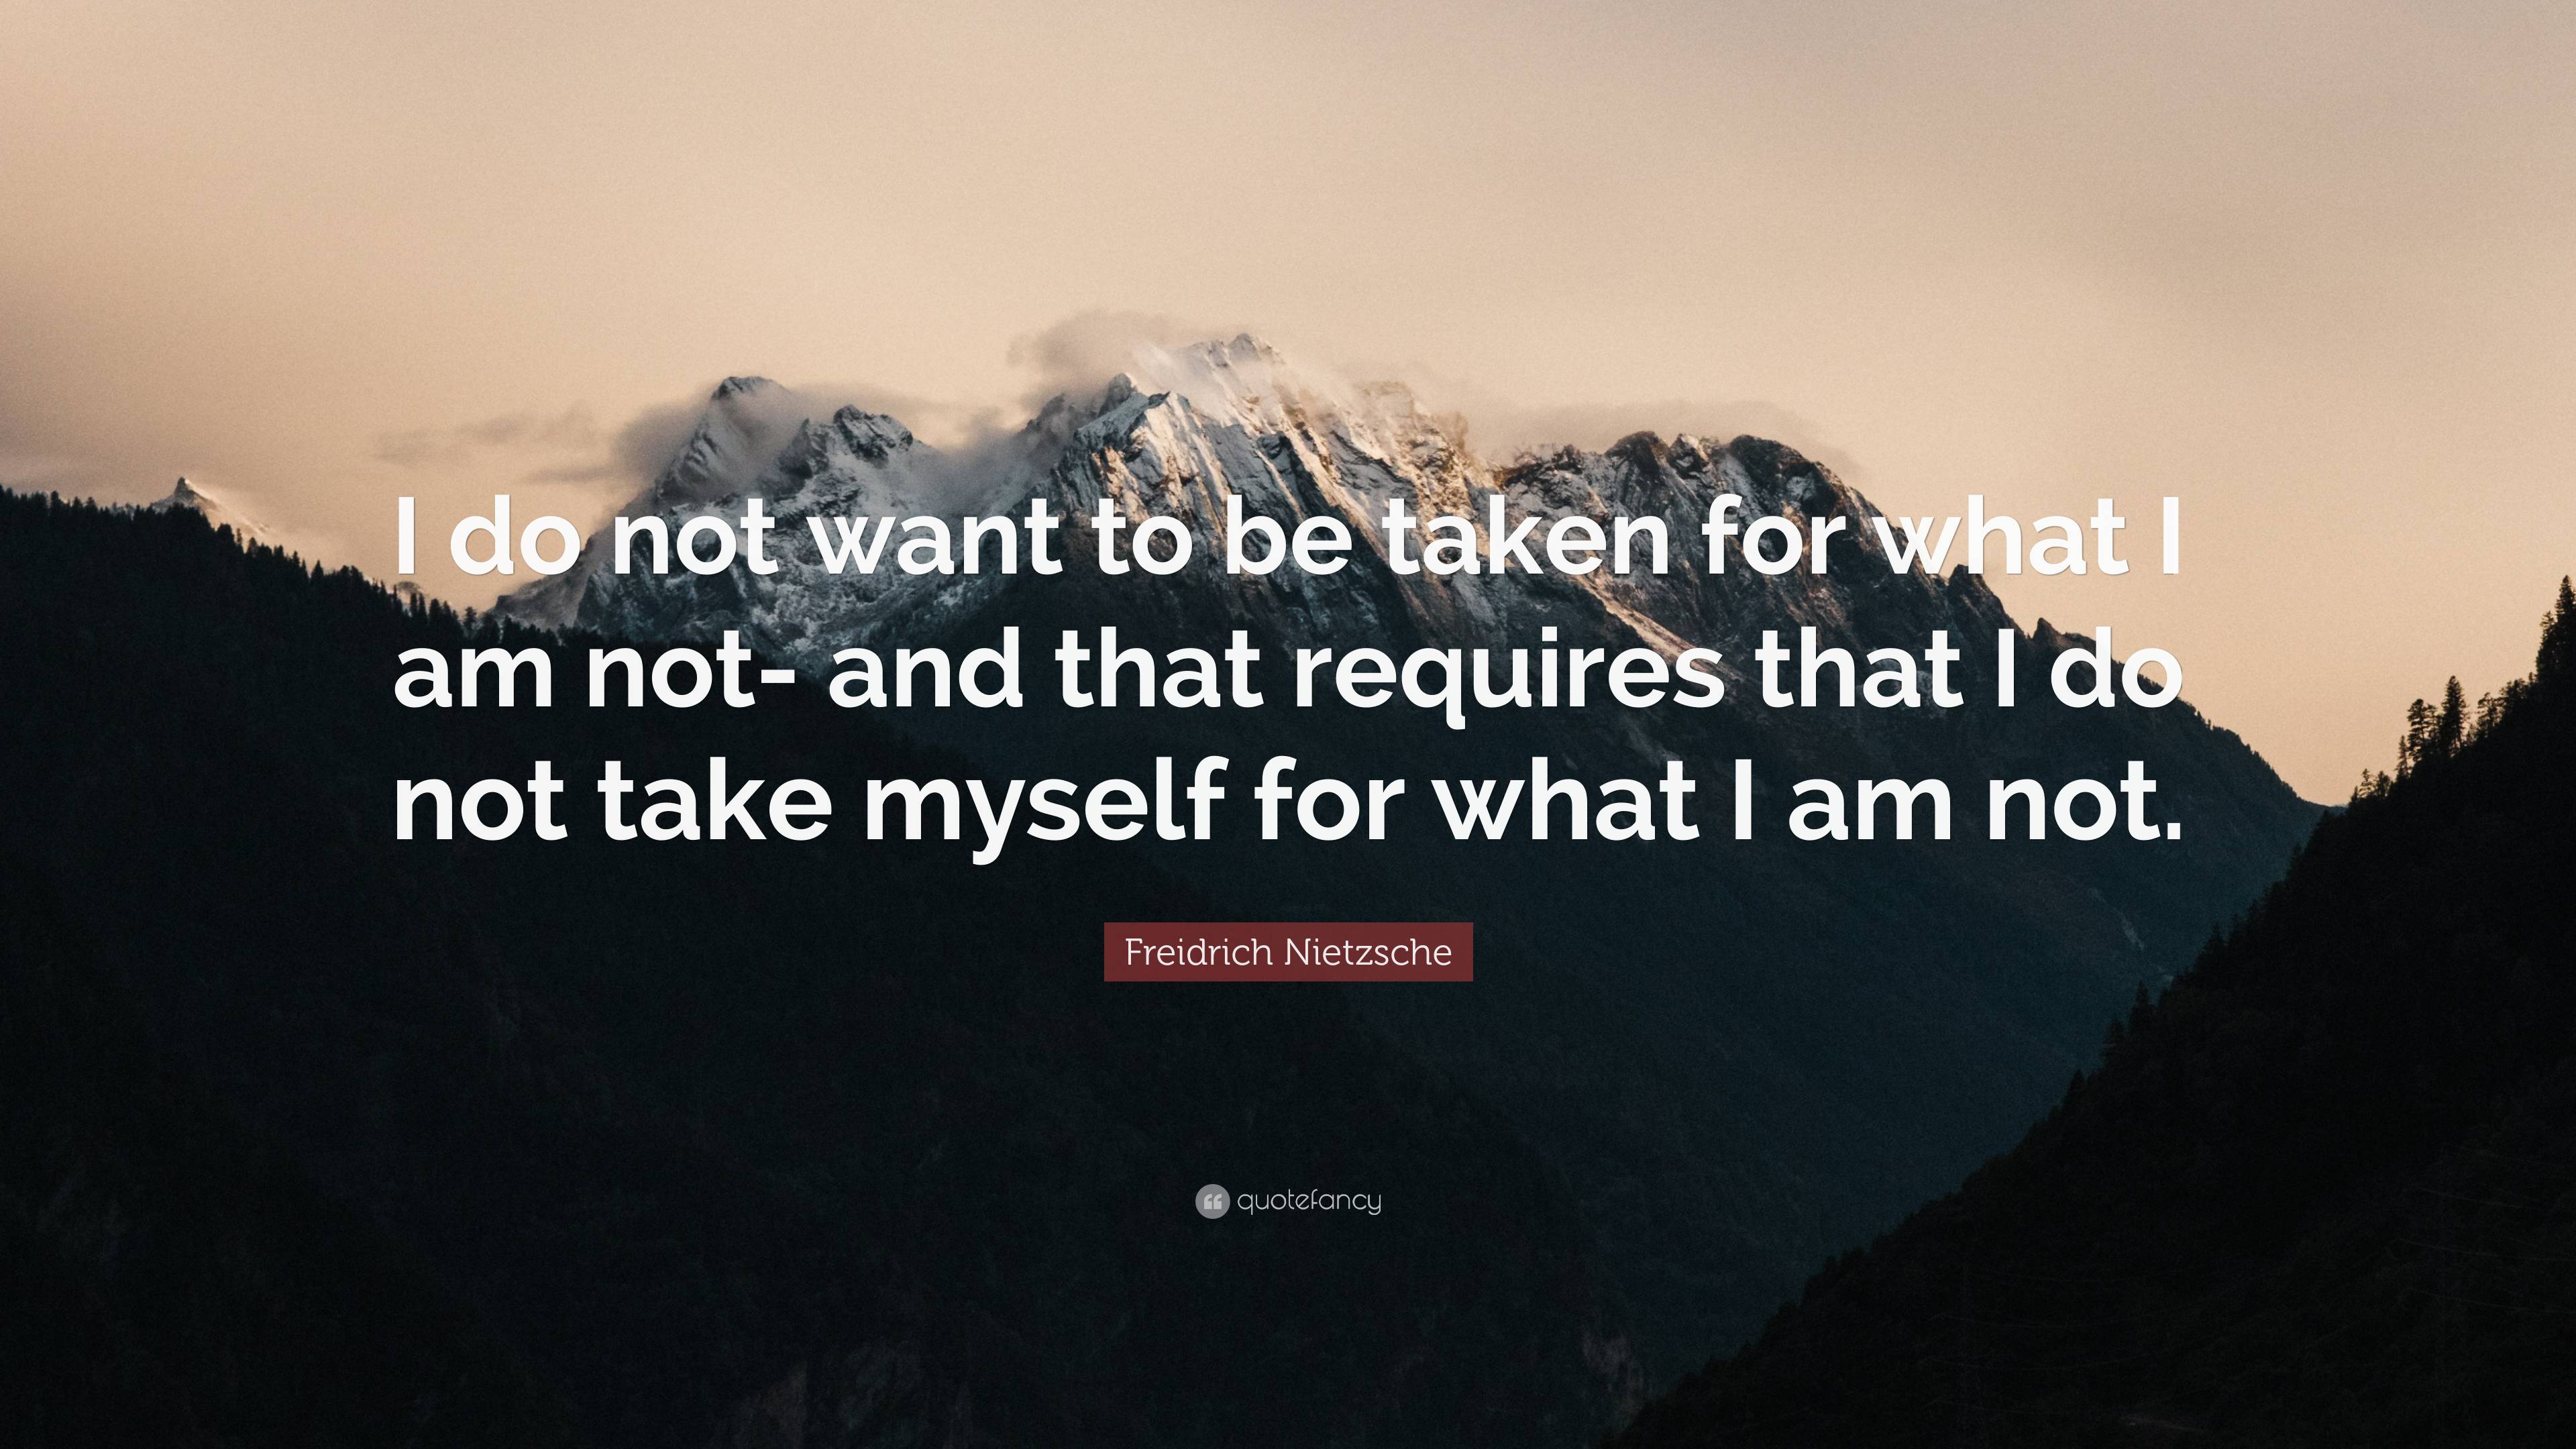 Freidrich Nietzsche Quote: “I do not want to be taken for what I am not ...